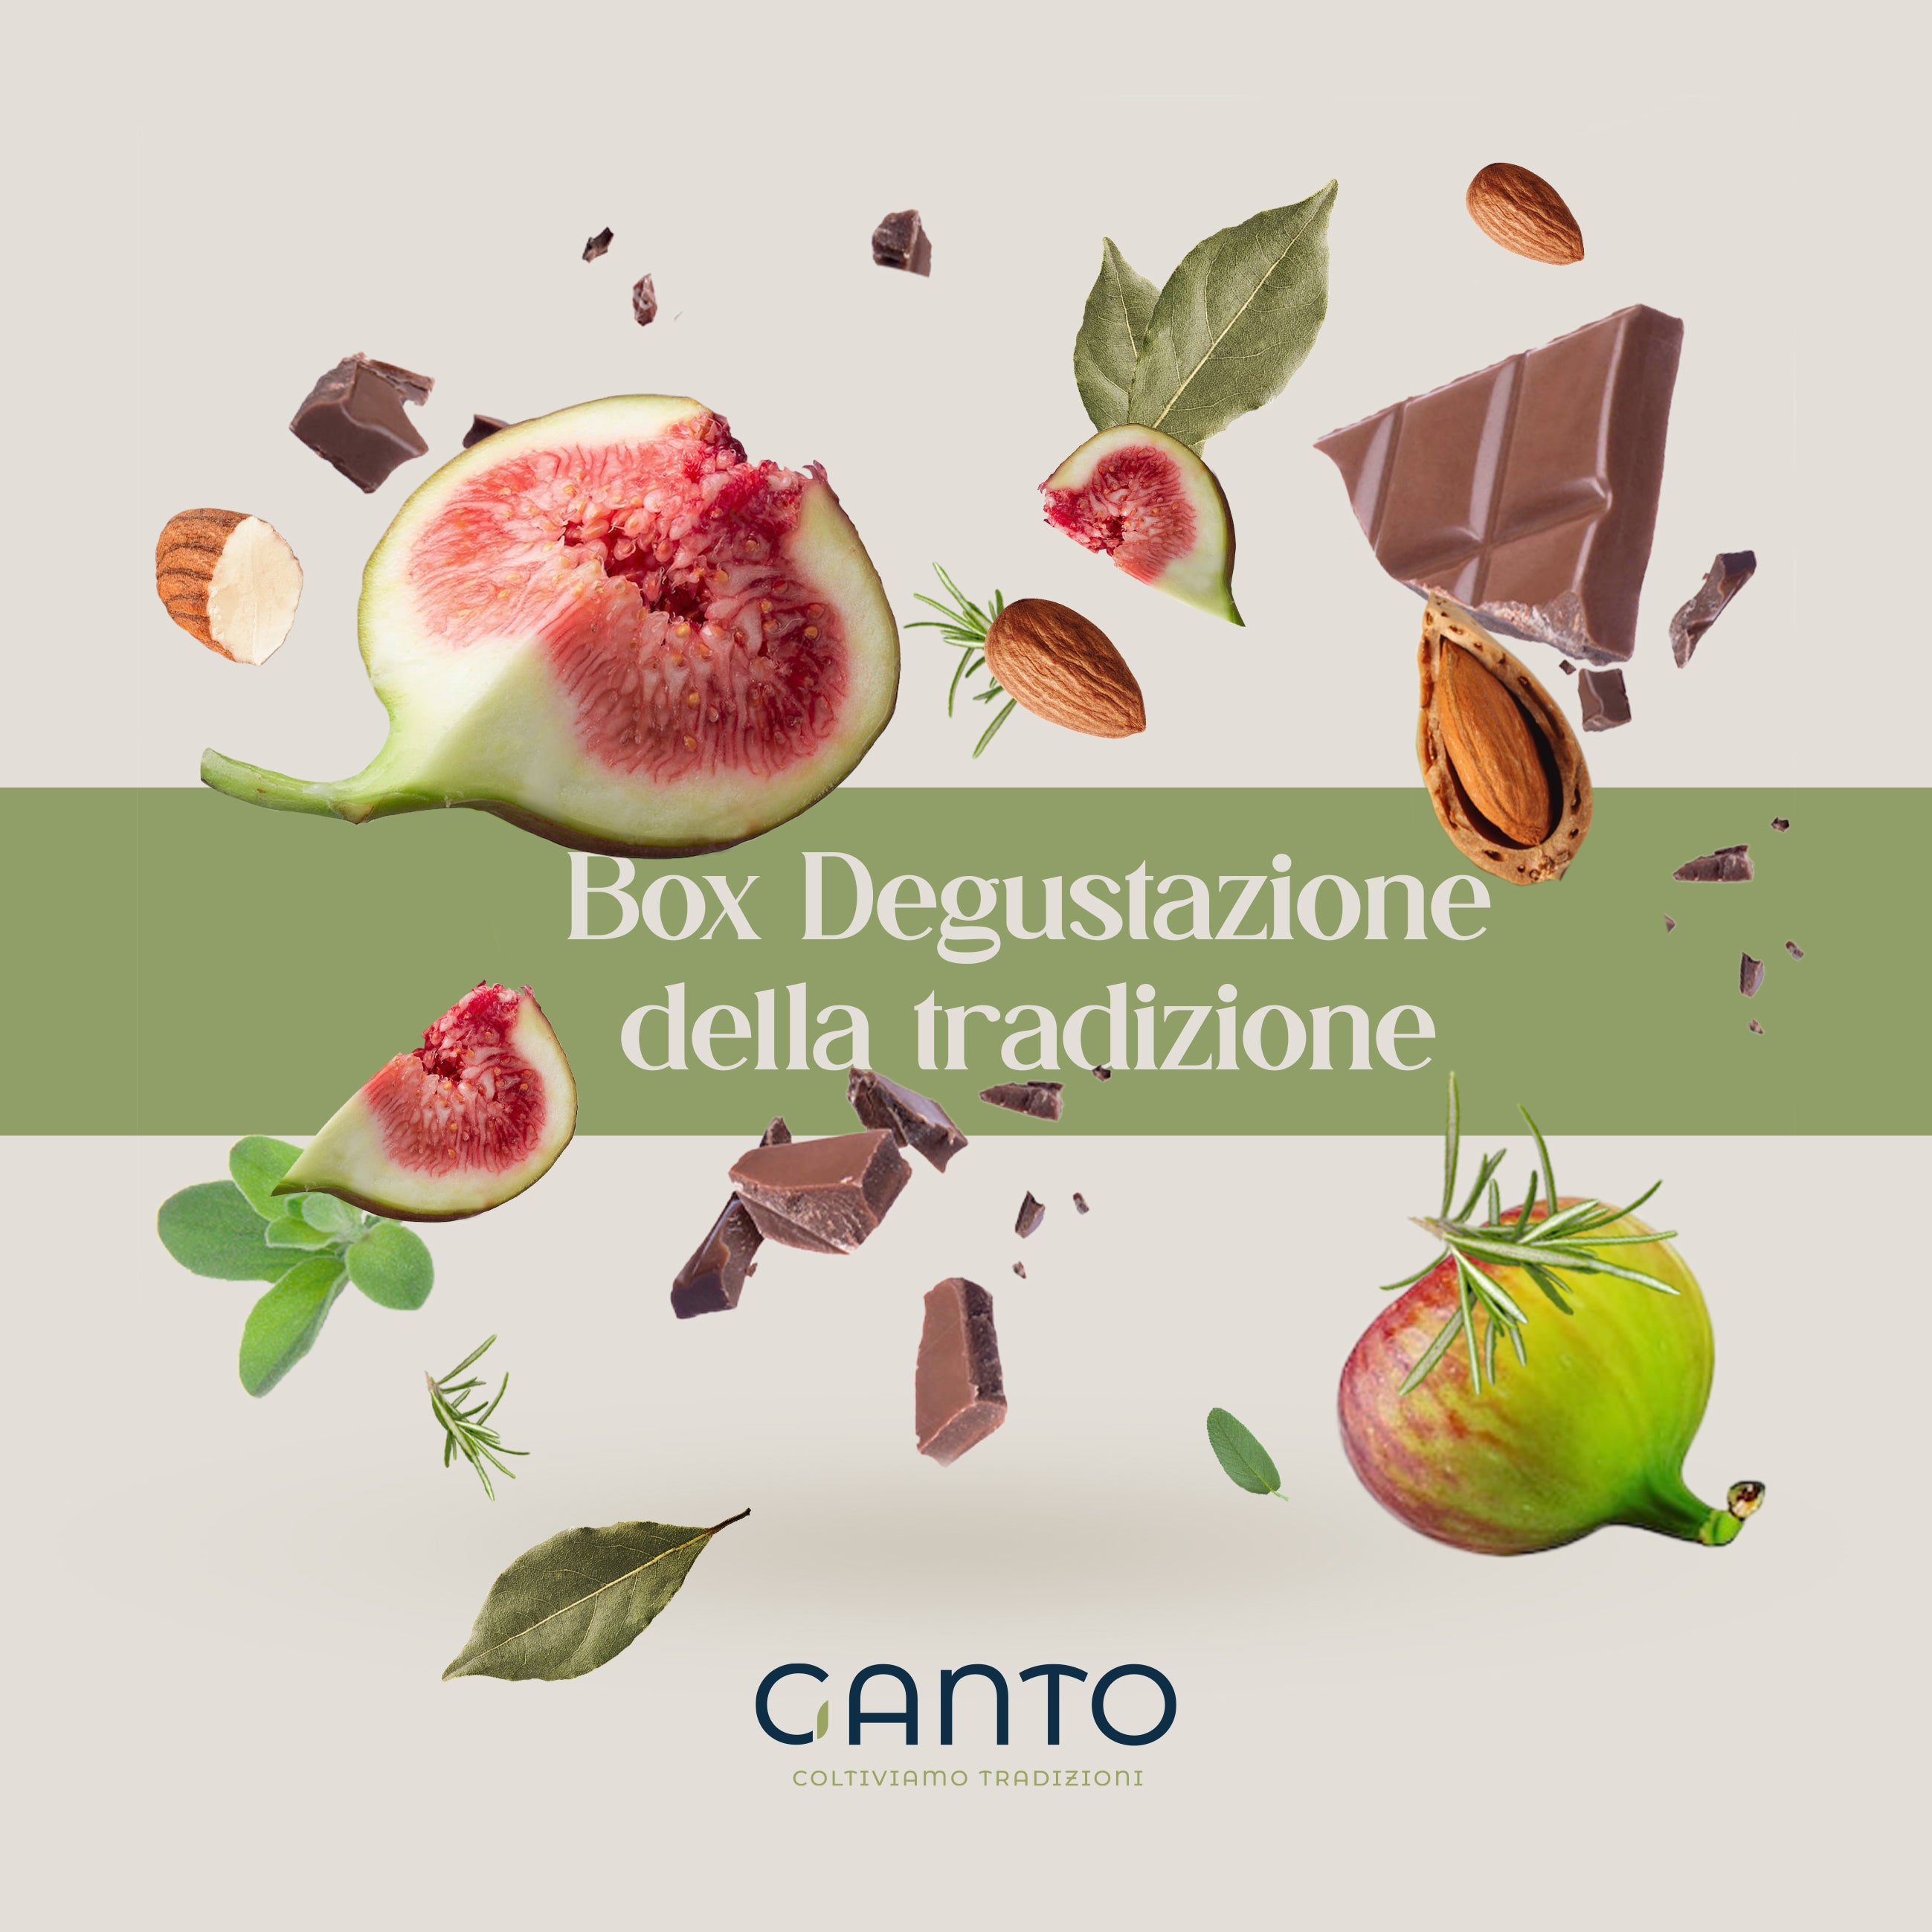 Traditional Tasting Box | Dried Figs with almonds (Fichi maritati) and Dottato figs with chocolate